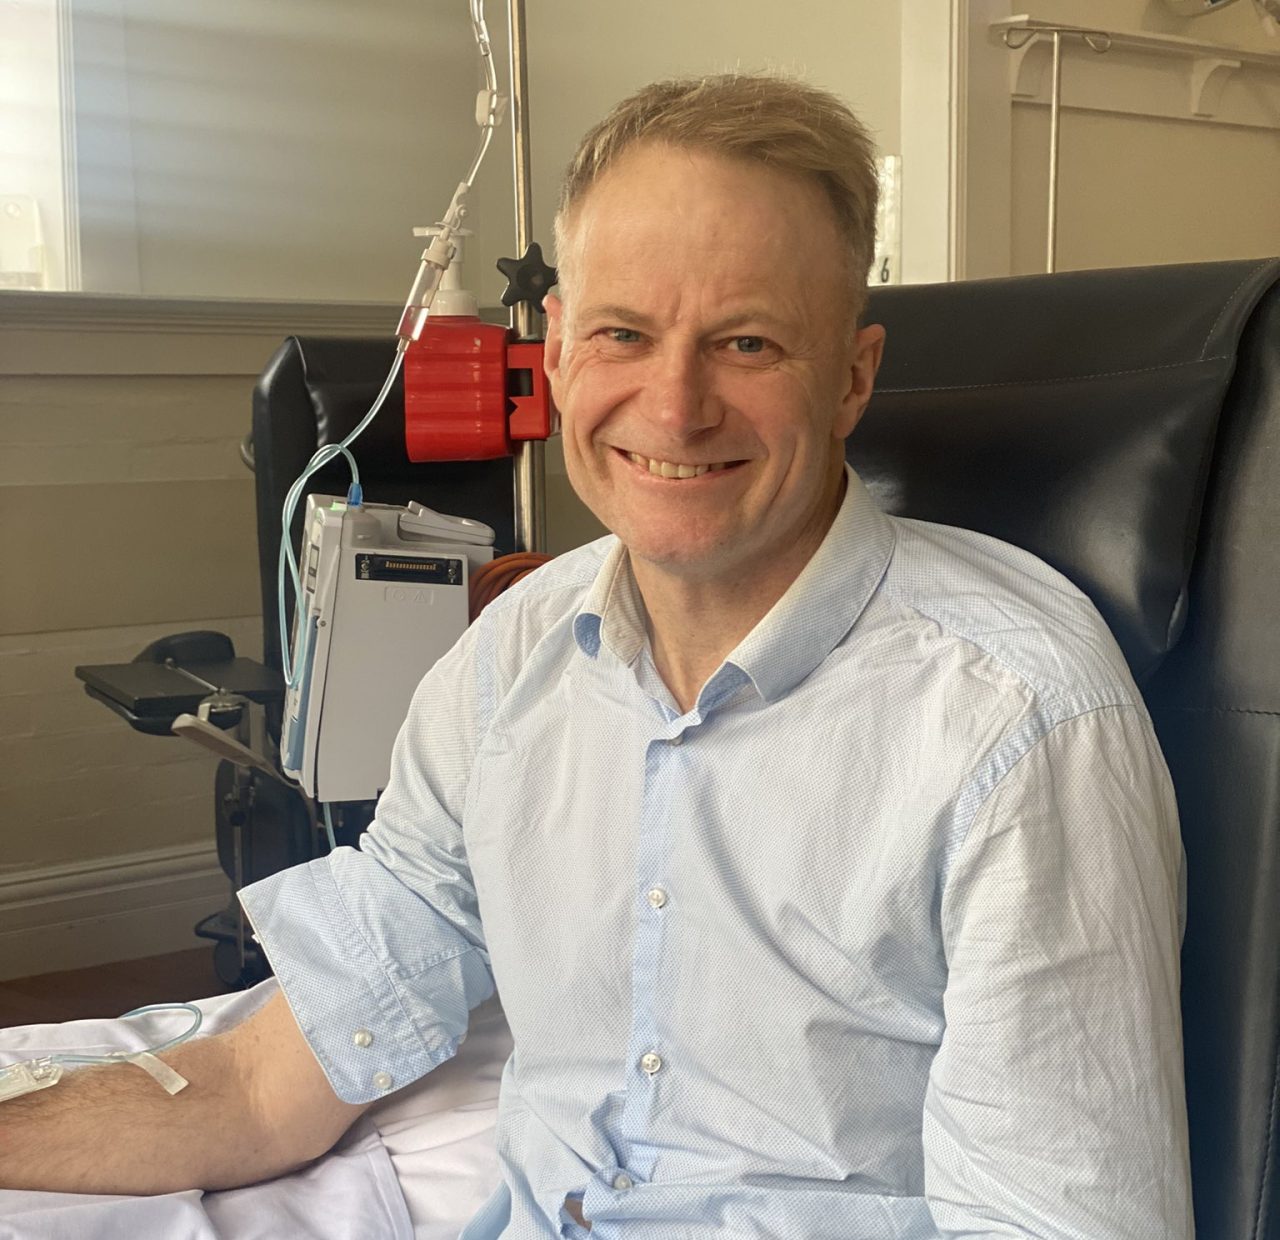 Richard Scolyer: I am super excited to now be receiving another dose of combi Immunotherapy (IO) for my glioblastoma.